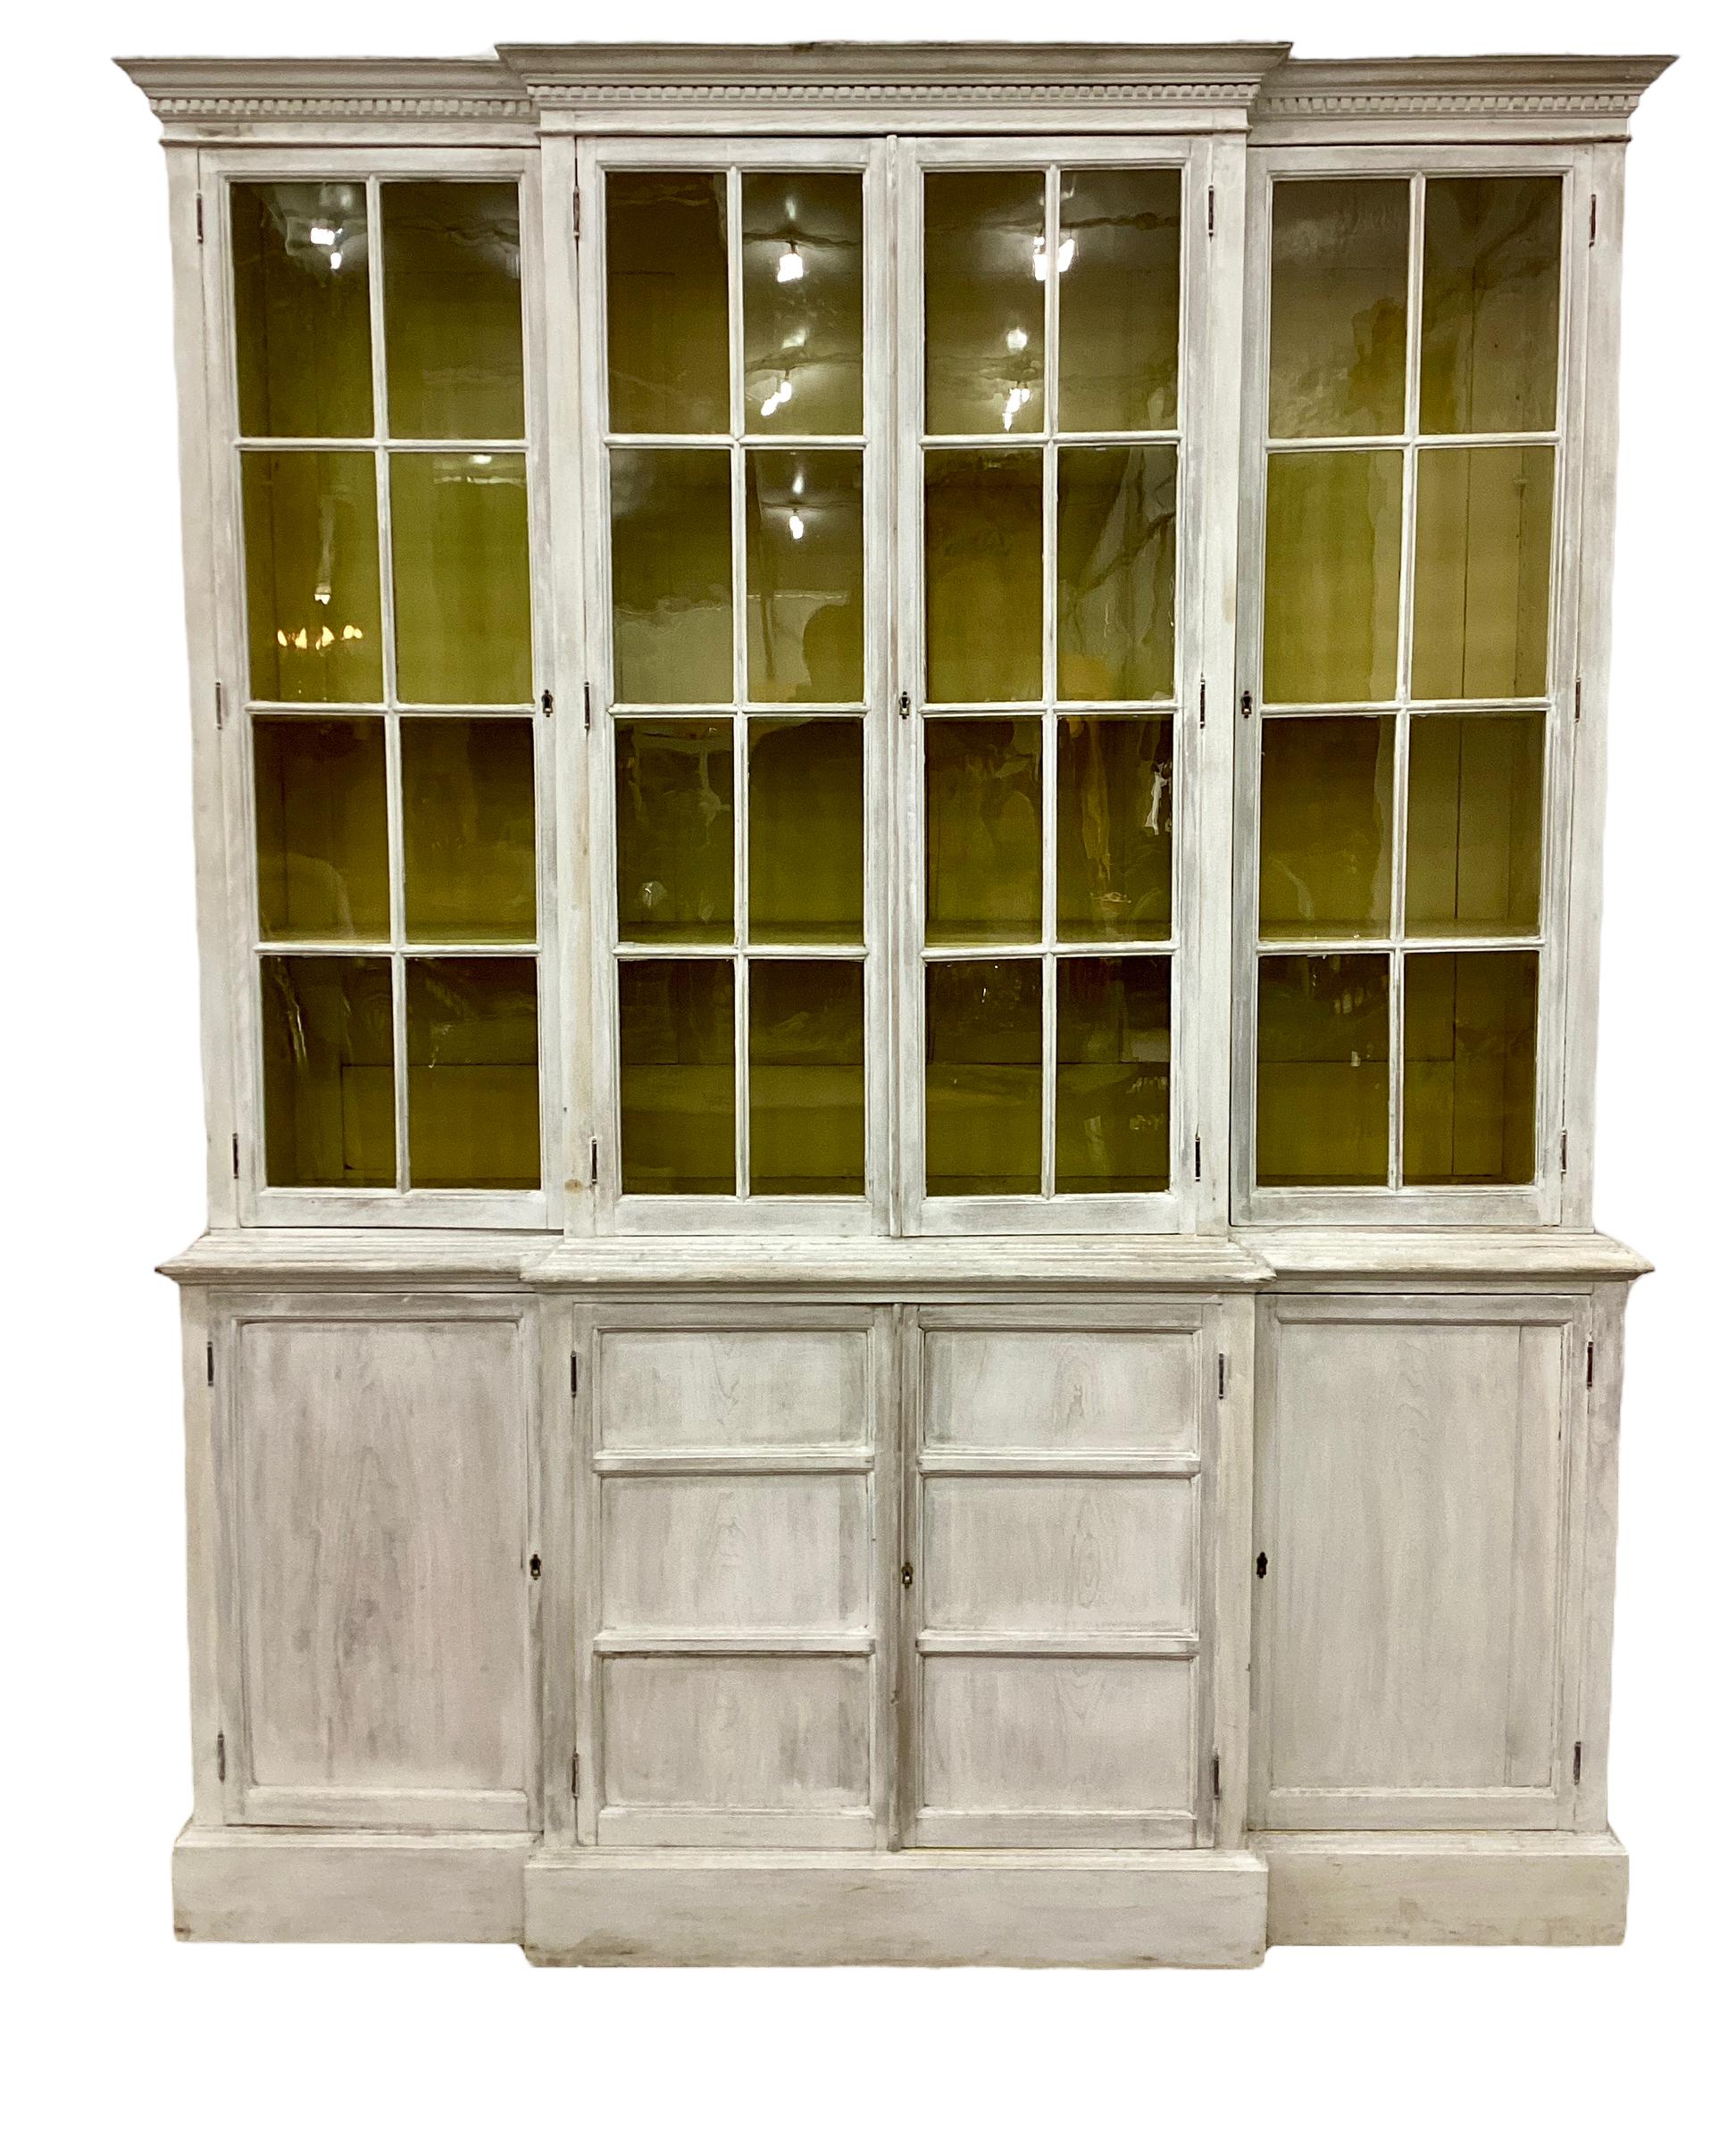 Fabulously proportioned and well sized two-part painted Pine English bookcase/cabinet from the late circa 19th century featuring a glazed upper section with two doors flanking a center double door and lined with adjustable shelves with a fun yellow